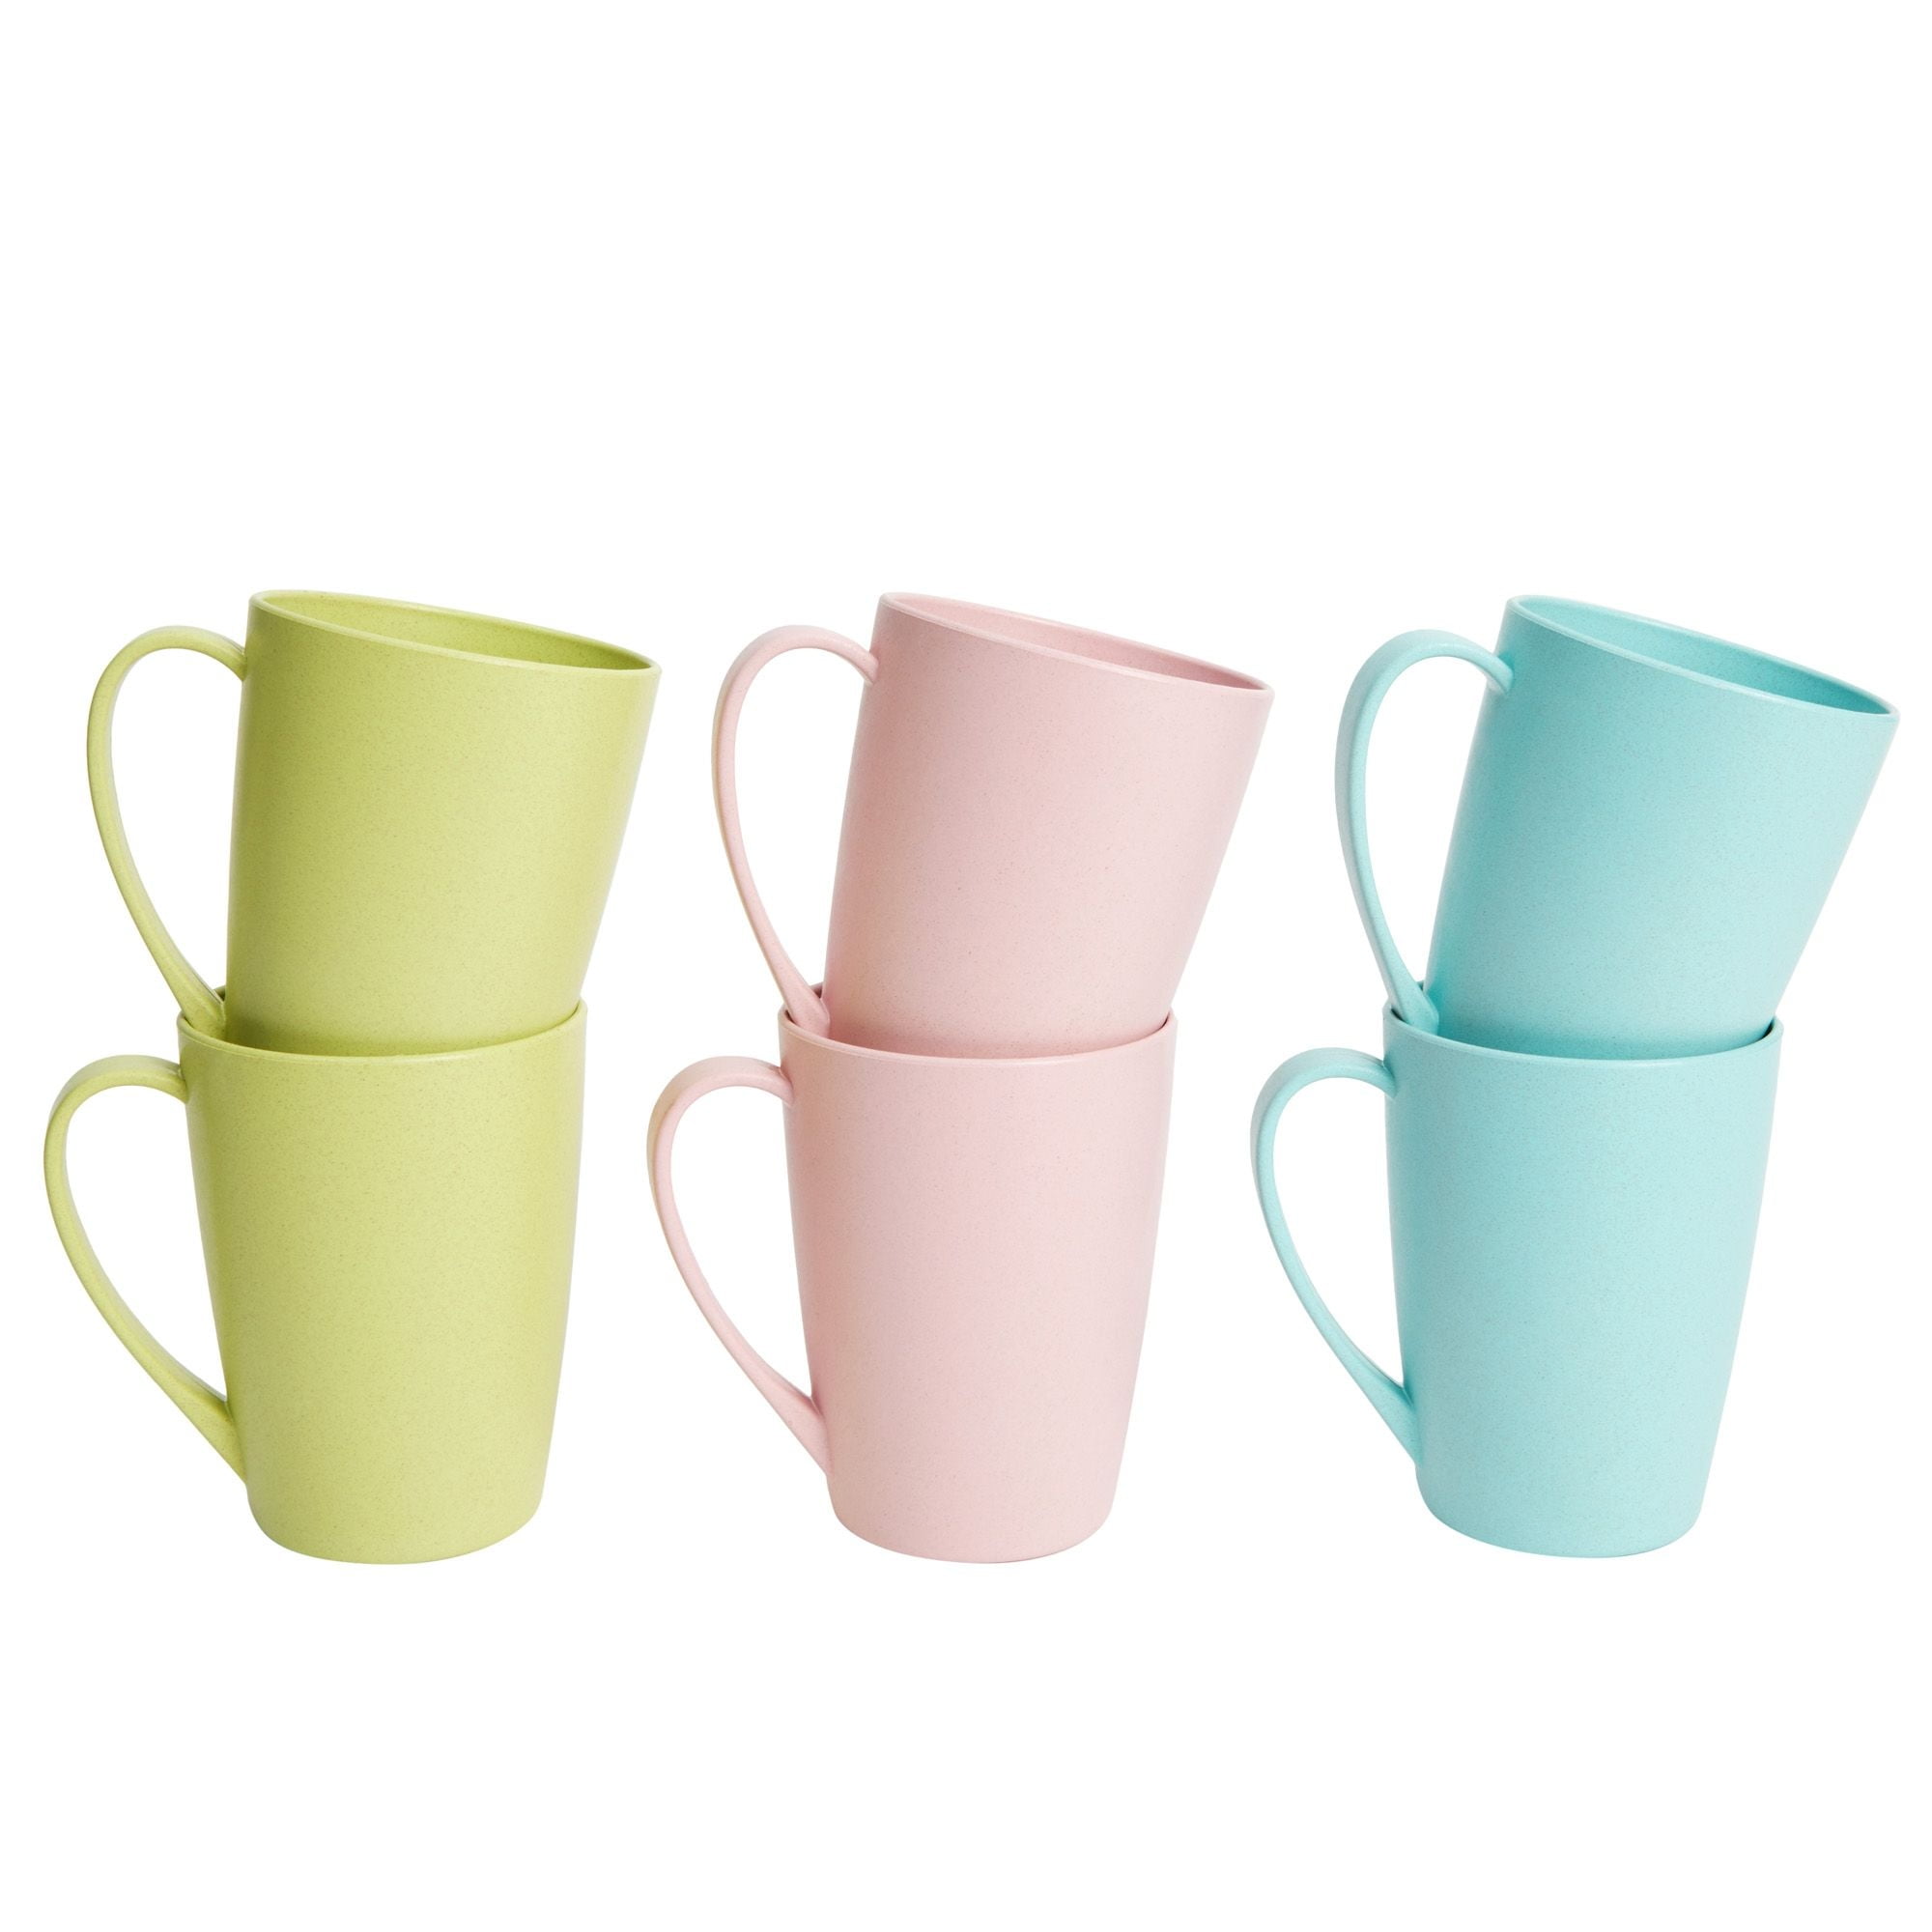 6 Pack Unbreakable Wheat Straw Cups for Coffee, Tea, Milk, Juice, 3 Colors,  Light Blue, Green, and Pink, Reusable Mugs, Dishwasher and Microwave-Safe